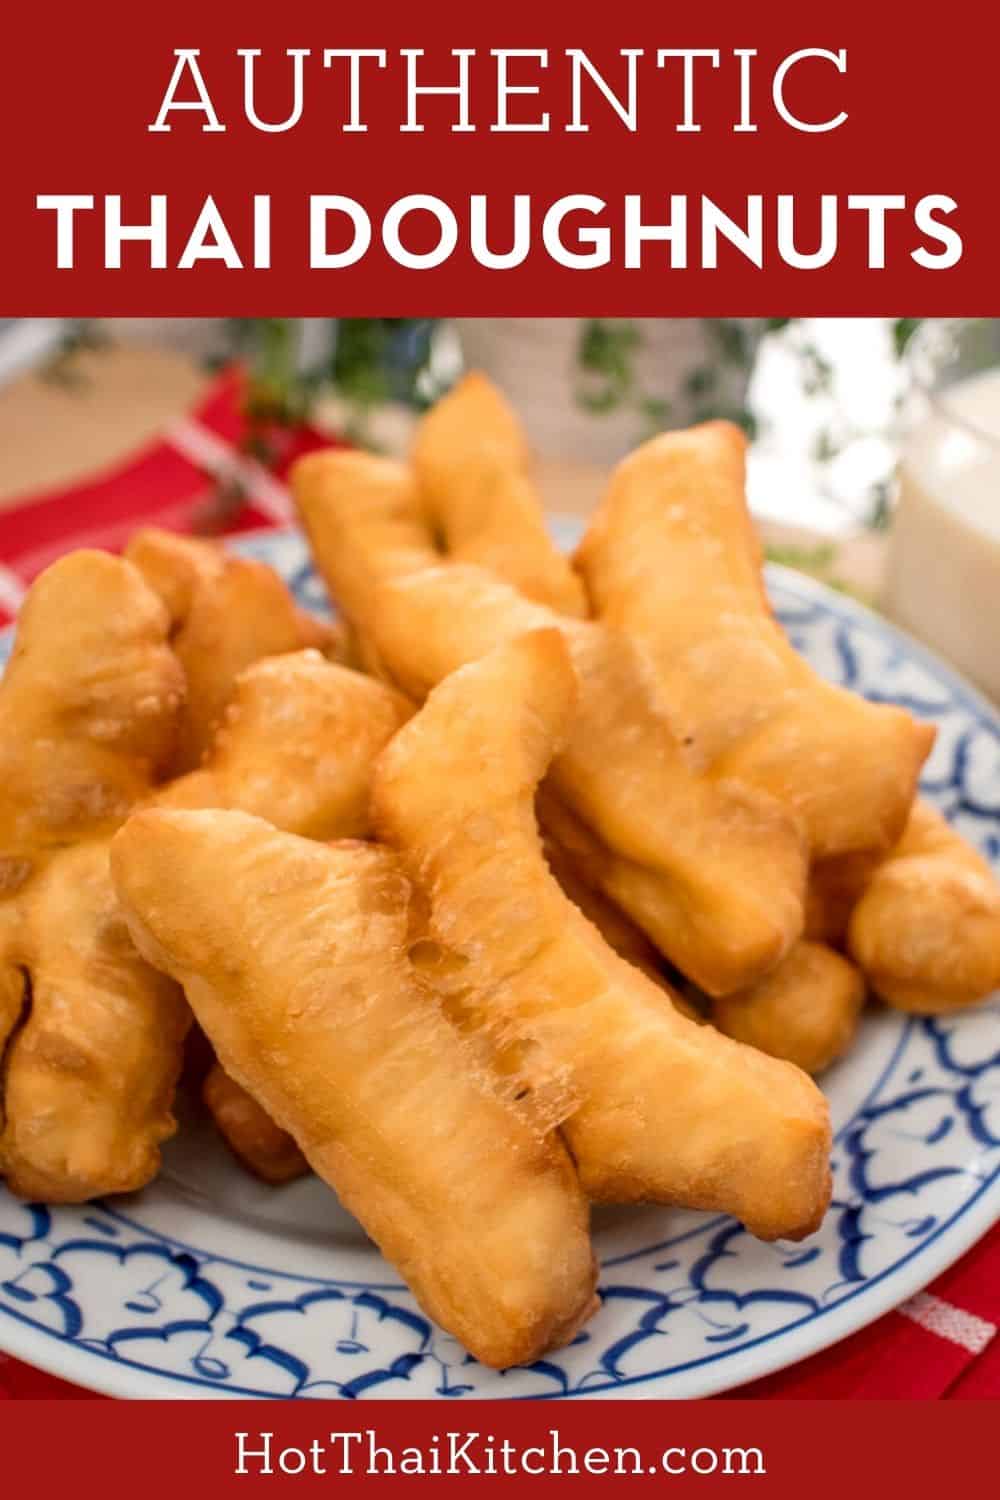 The ultimate Thai breakfast experience. This simple recipe is authentic and uses a key ingredient that yields the best, crispy, airy pa tong go, just like in Thailand! #thaifood #streetfood #chinesedoughnuts